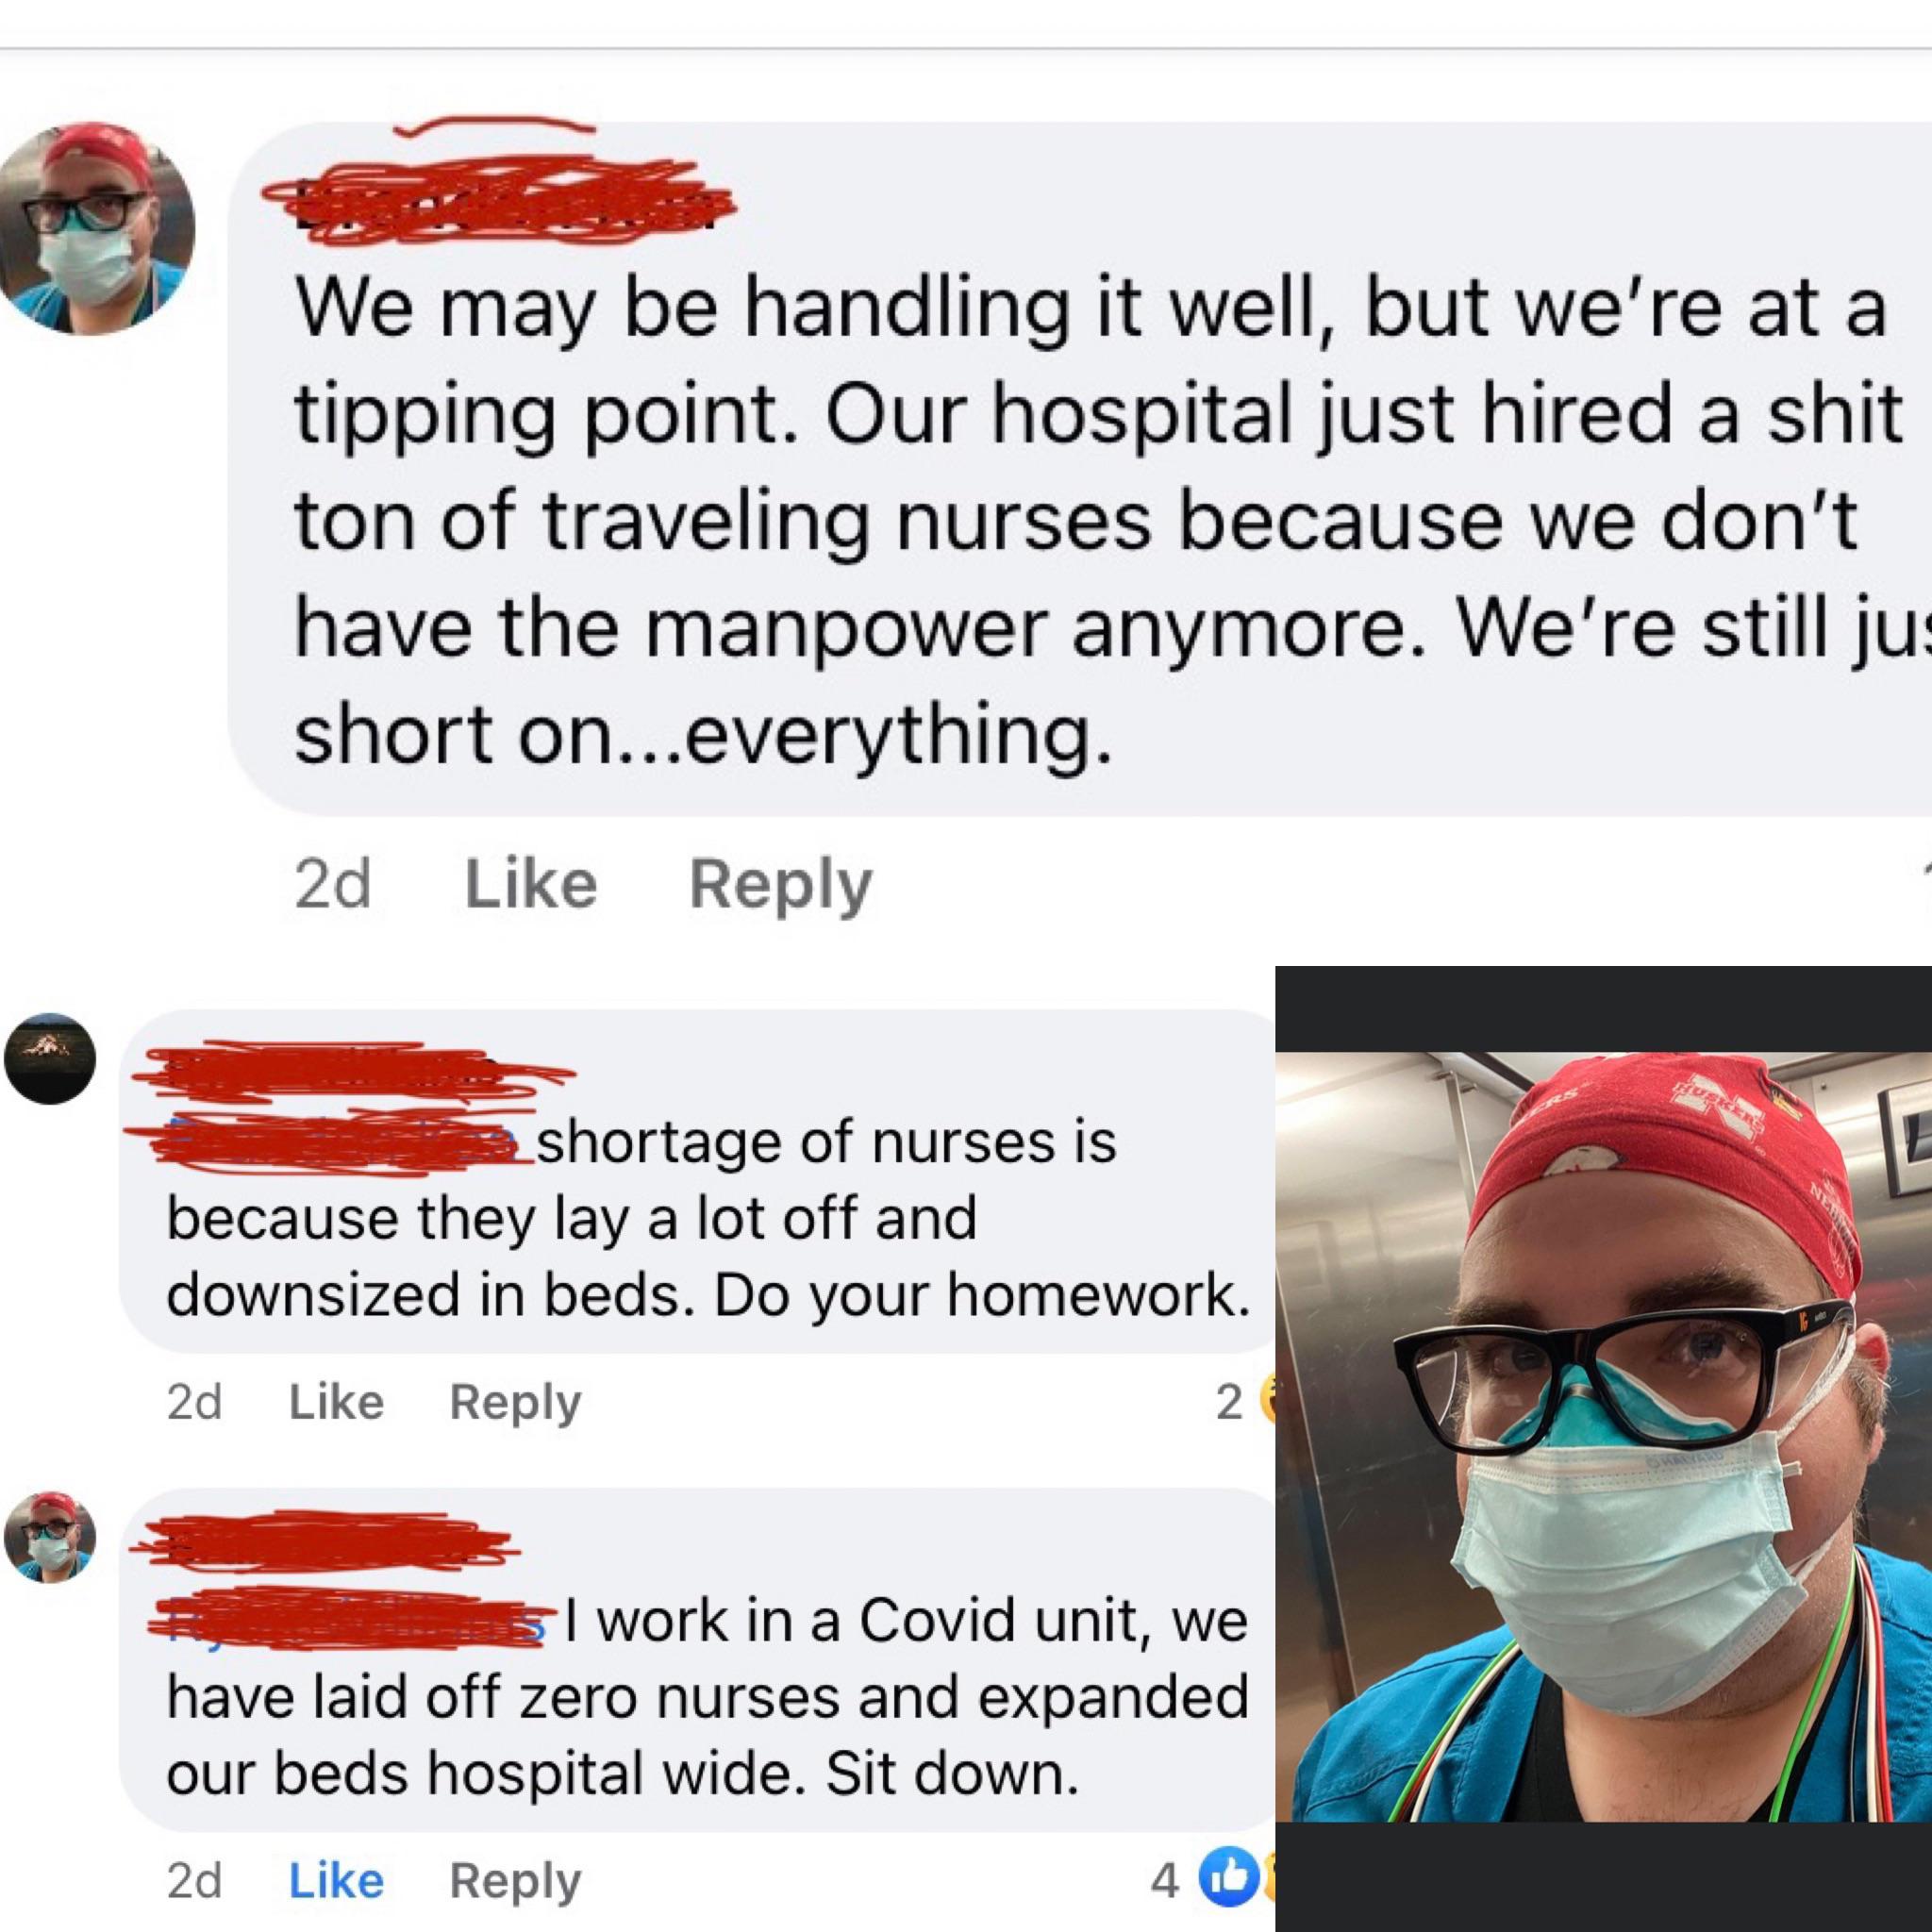 eyewear - We may be handling it well, but we're at a tipping point. Our hospital just hired a shit ton of traveling nurses because we don't have the manpower anymore. We're still ju short on...everything. 2d shortage of nurses is because they lay a lot of